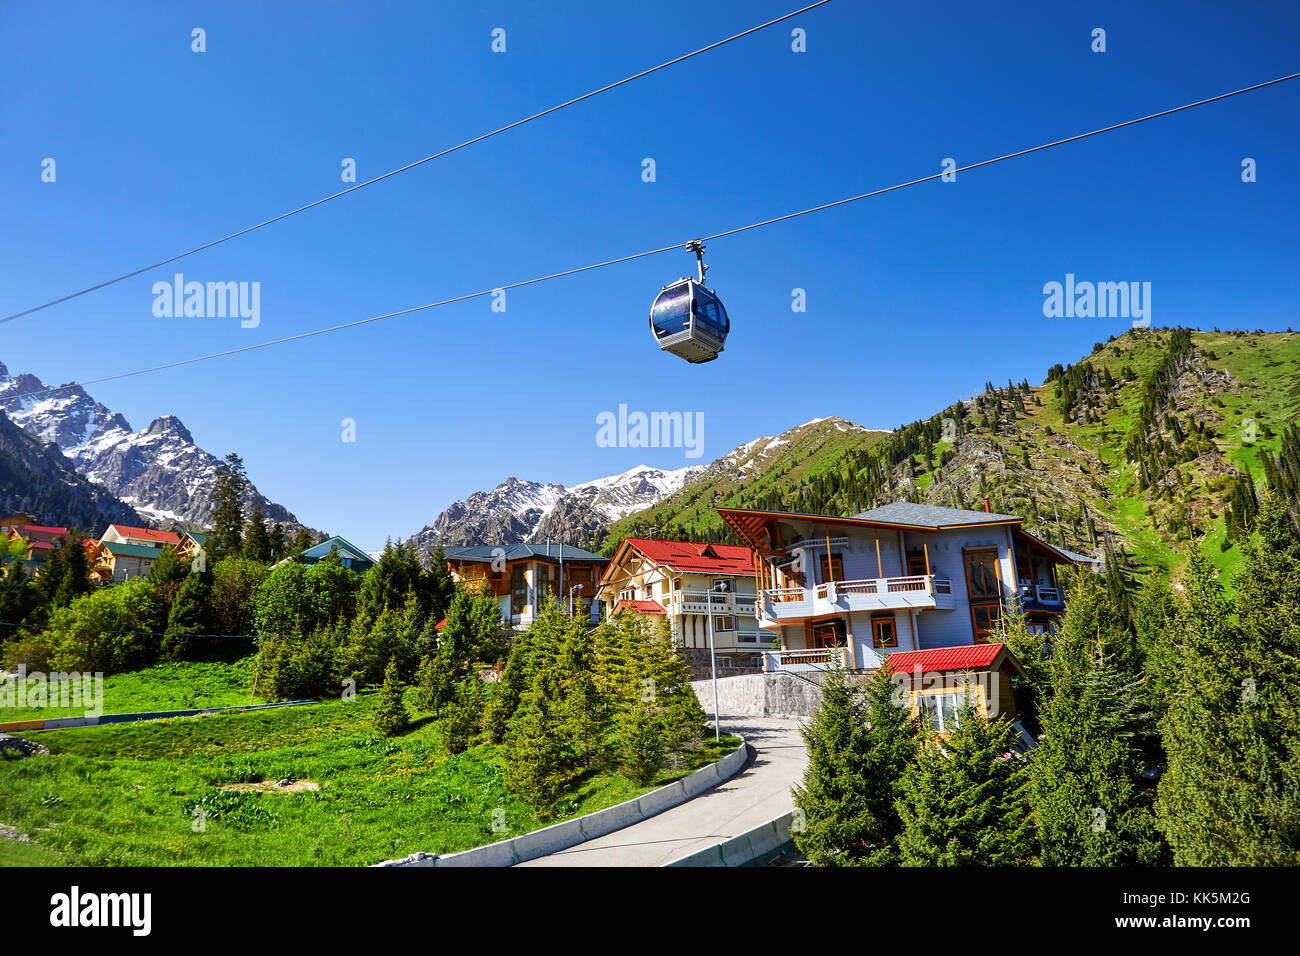 Cable car and cottages in the mountain ski resort Chimbylak in Almaty, Kazakhstan Stock Photo